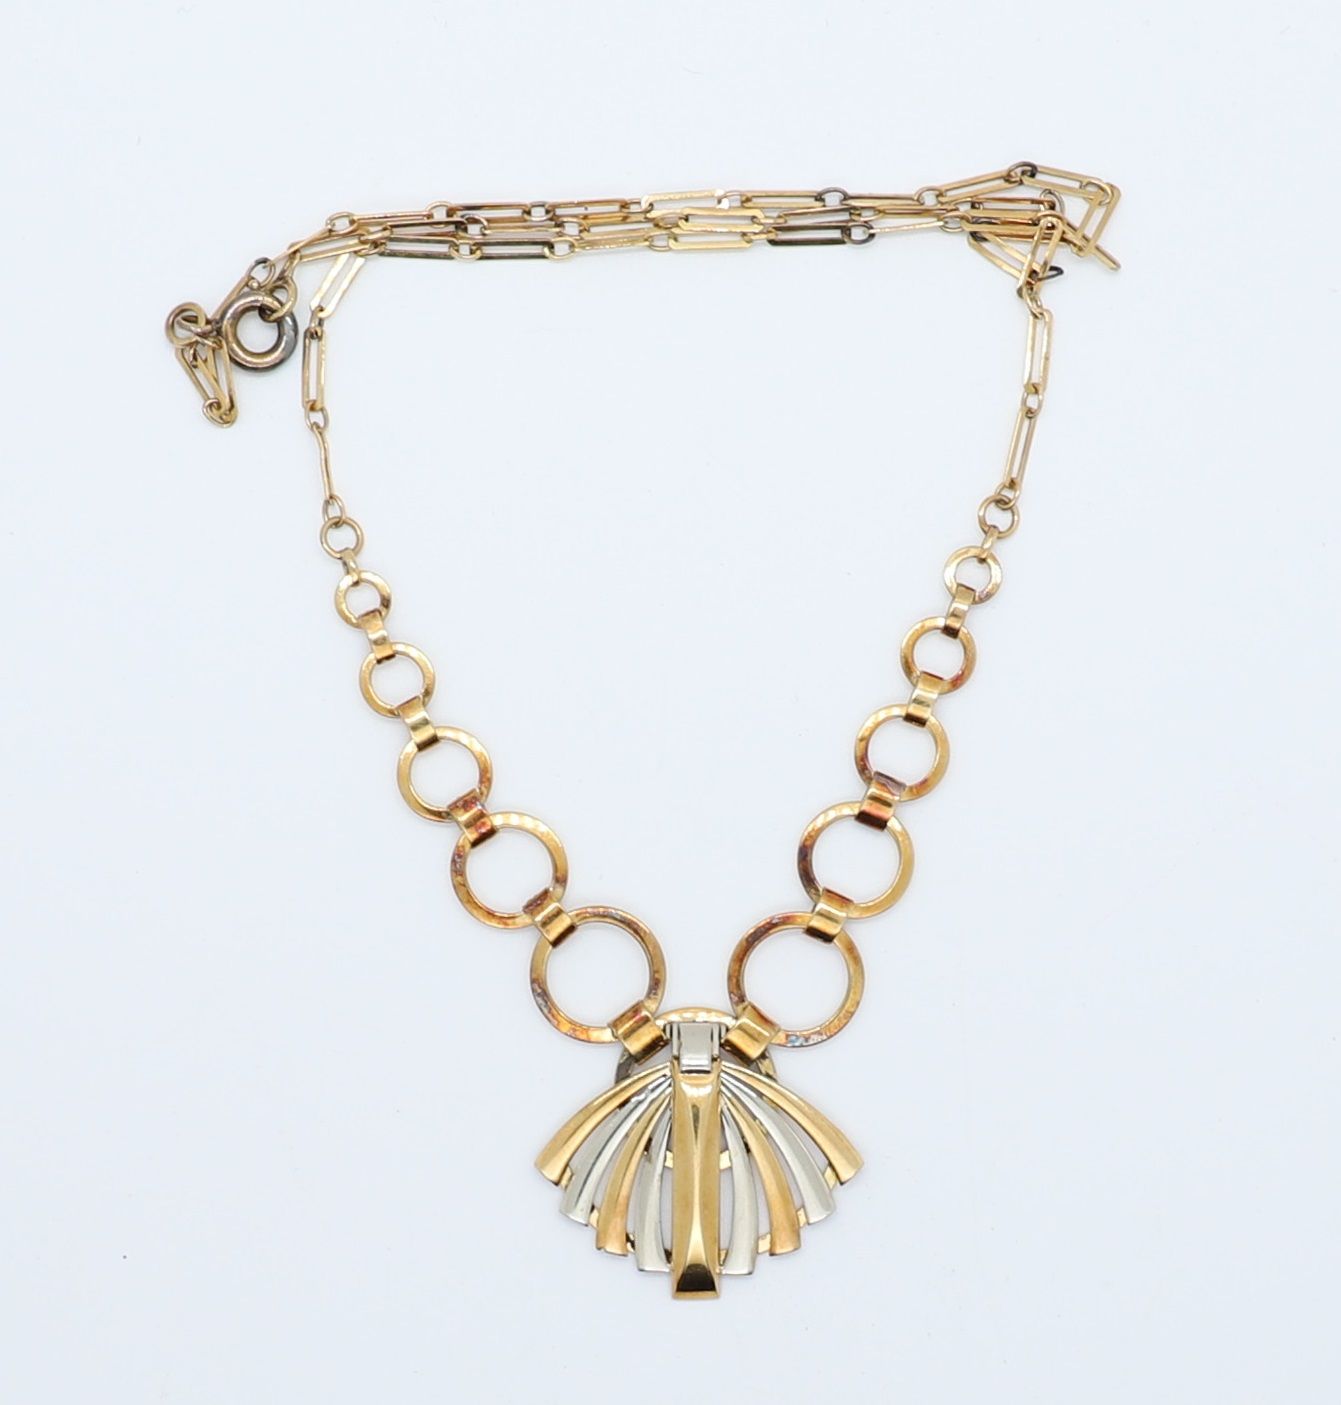 Null YELLOW AND WHITE GOLD "PALM" NECKLACE
Marked with an eagle's head
L : 42 cm&hellip;